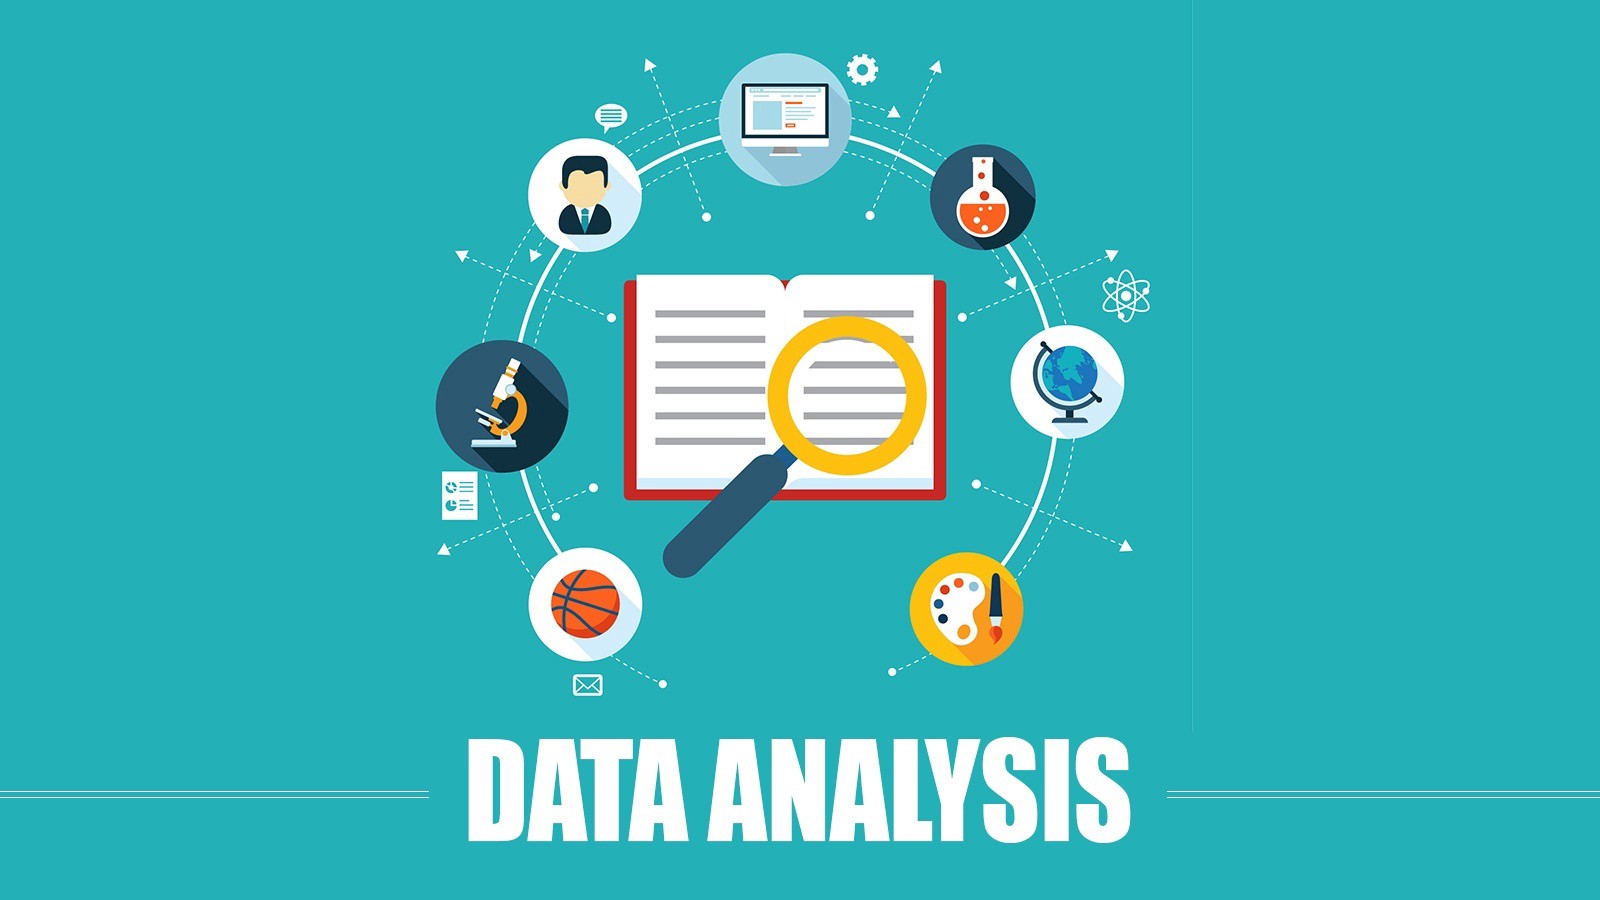 what is not included in presentation and analysis of data